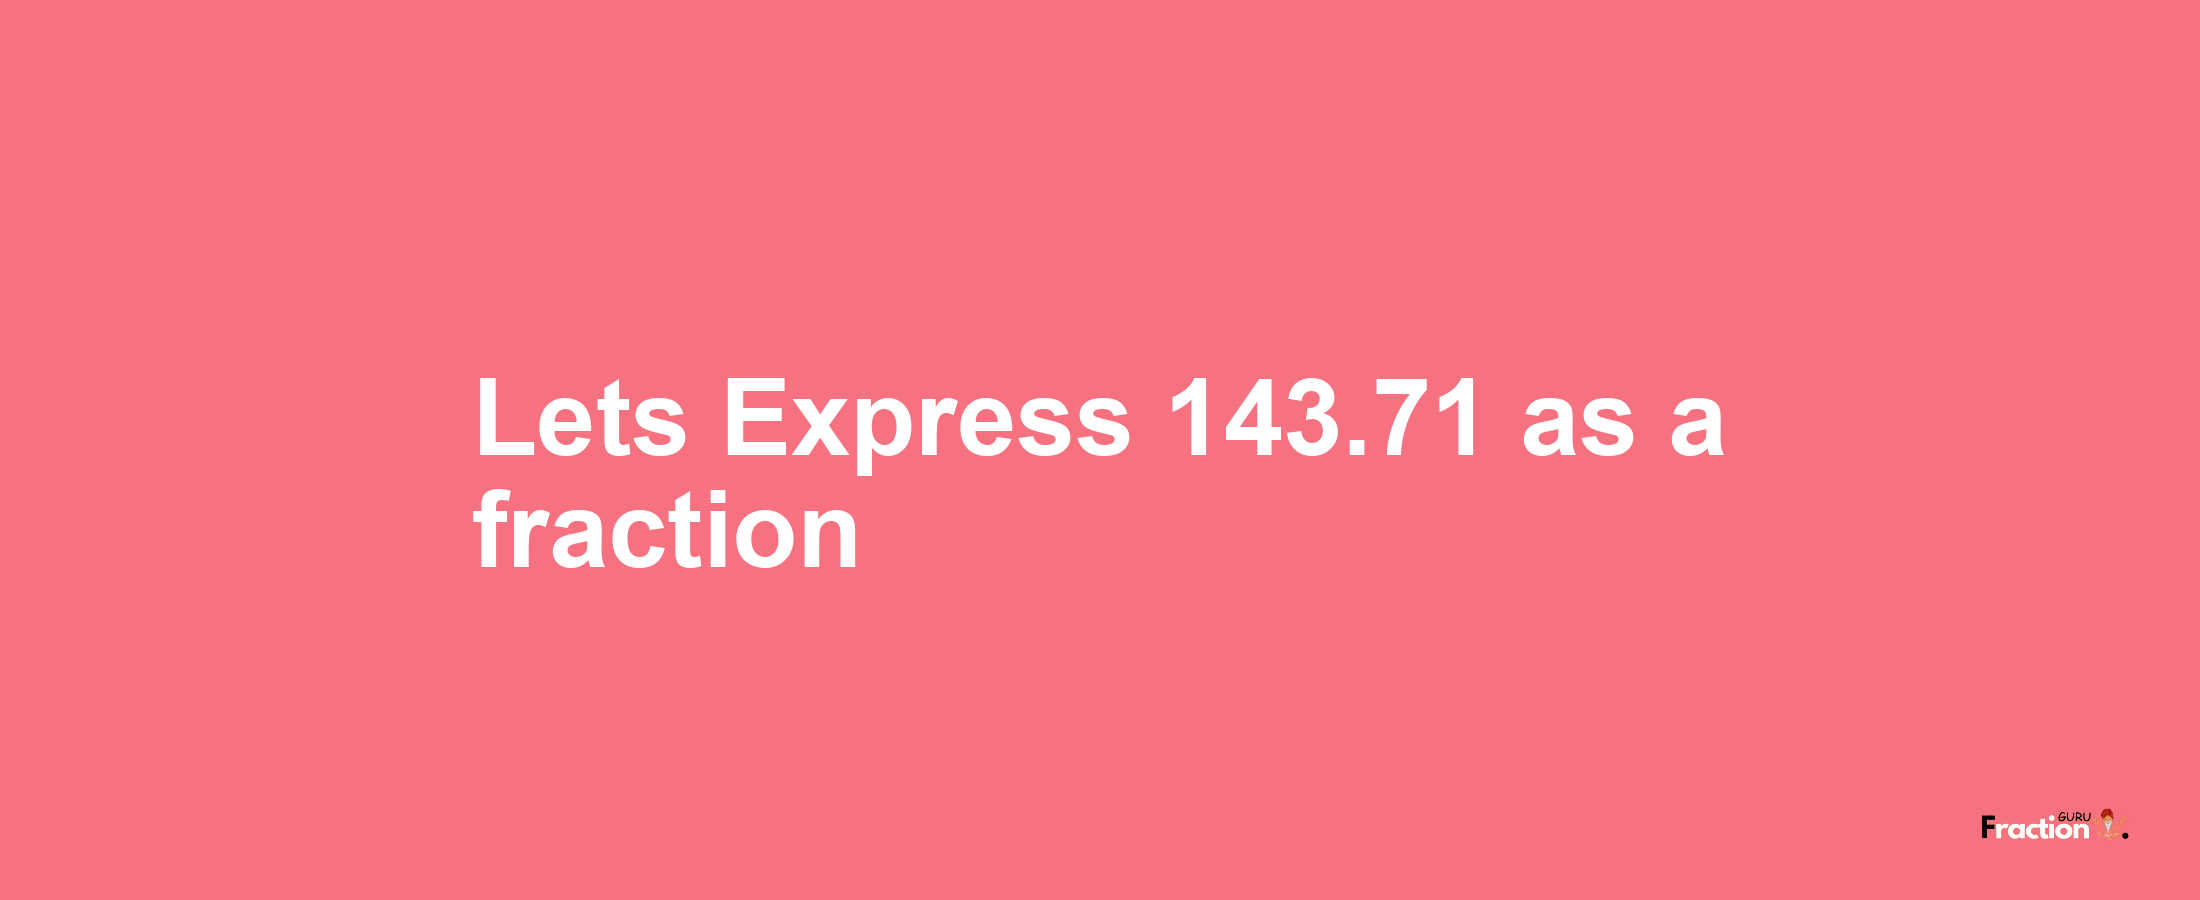 Lets Express 143.71 as afraction